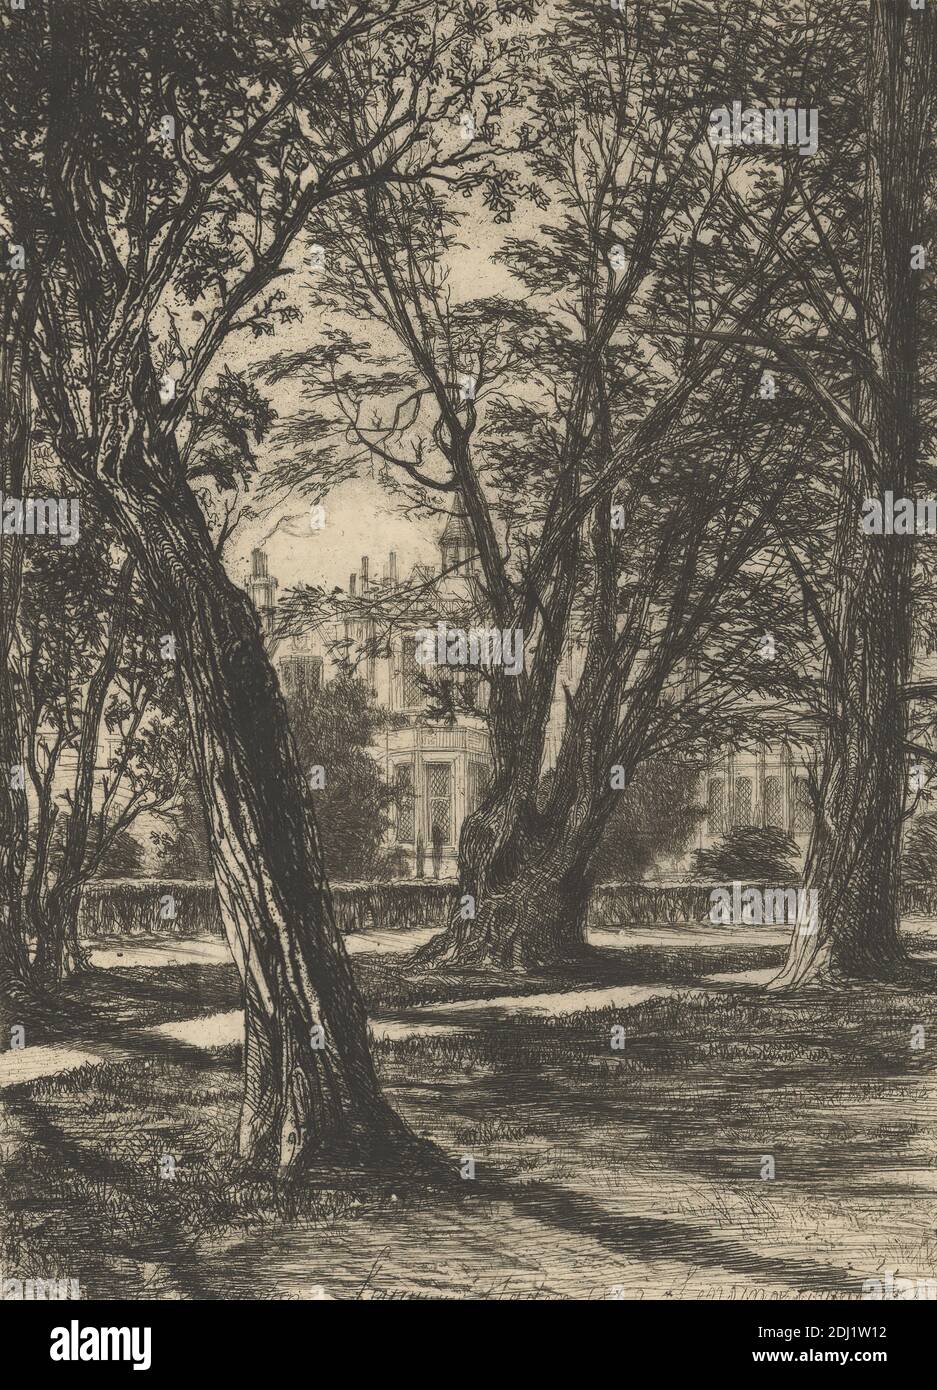 Kensington Gardens, no. 1 (small plate), Francis Seymour Haden, 1818–1910, British, 1859, Etching and drypoint, with plate tone on thin, smooth, cream laid paper, Sheet: 8 1/8 x 5 11/16 inches (20.6 x 14.4 cm), Plate: 6 1/4 x 4 5/8 inches (15.9 x 11.7 cm), and Image: 6 1/4 x 4 5/8 inches (15.9 x 11.7 cm), architectural subject, building, chimneys, cityscape, garden, grass, hedge, house, landscape, lawn, palace, path, shadows, trees, turret, windows, England, Europe, Hyde Park, Kensington, Kensington Gardens, London, United Kingdom Stock Photo